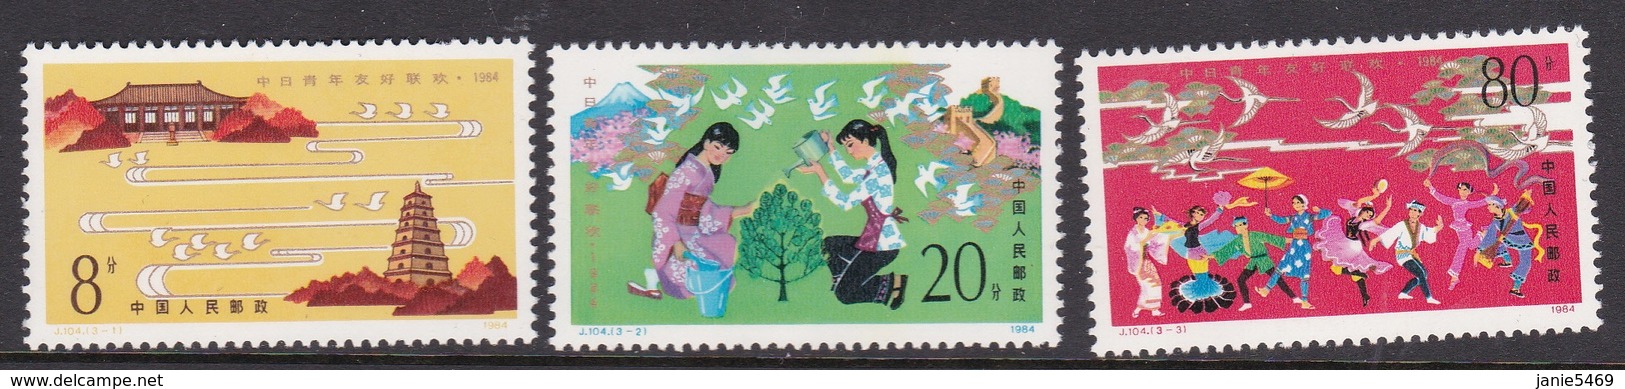 China People's Republic SG 3340-3342 1984 Youth Friendship Festival, Mint Never Hinged - Neufs